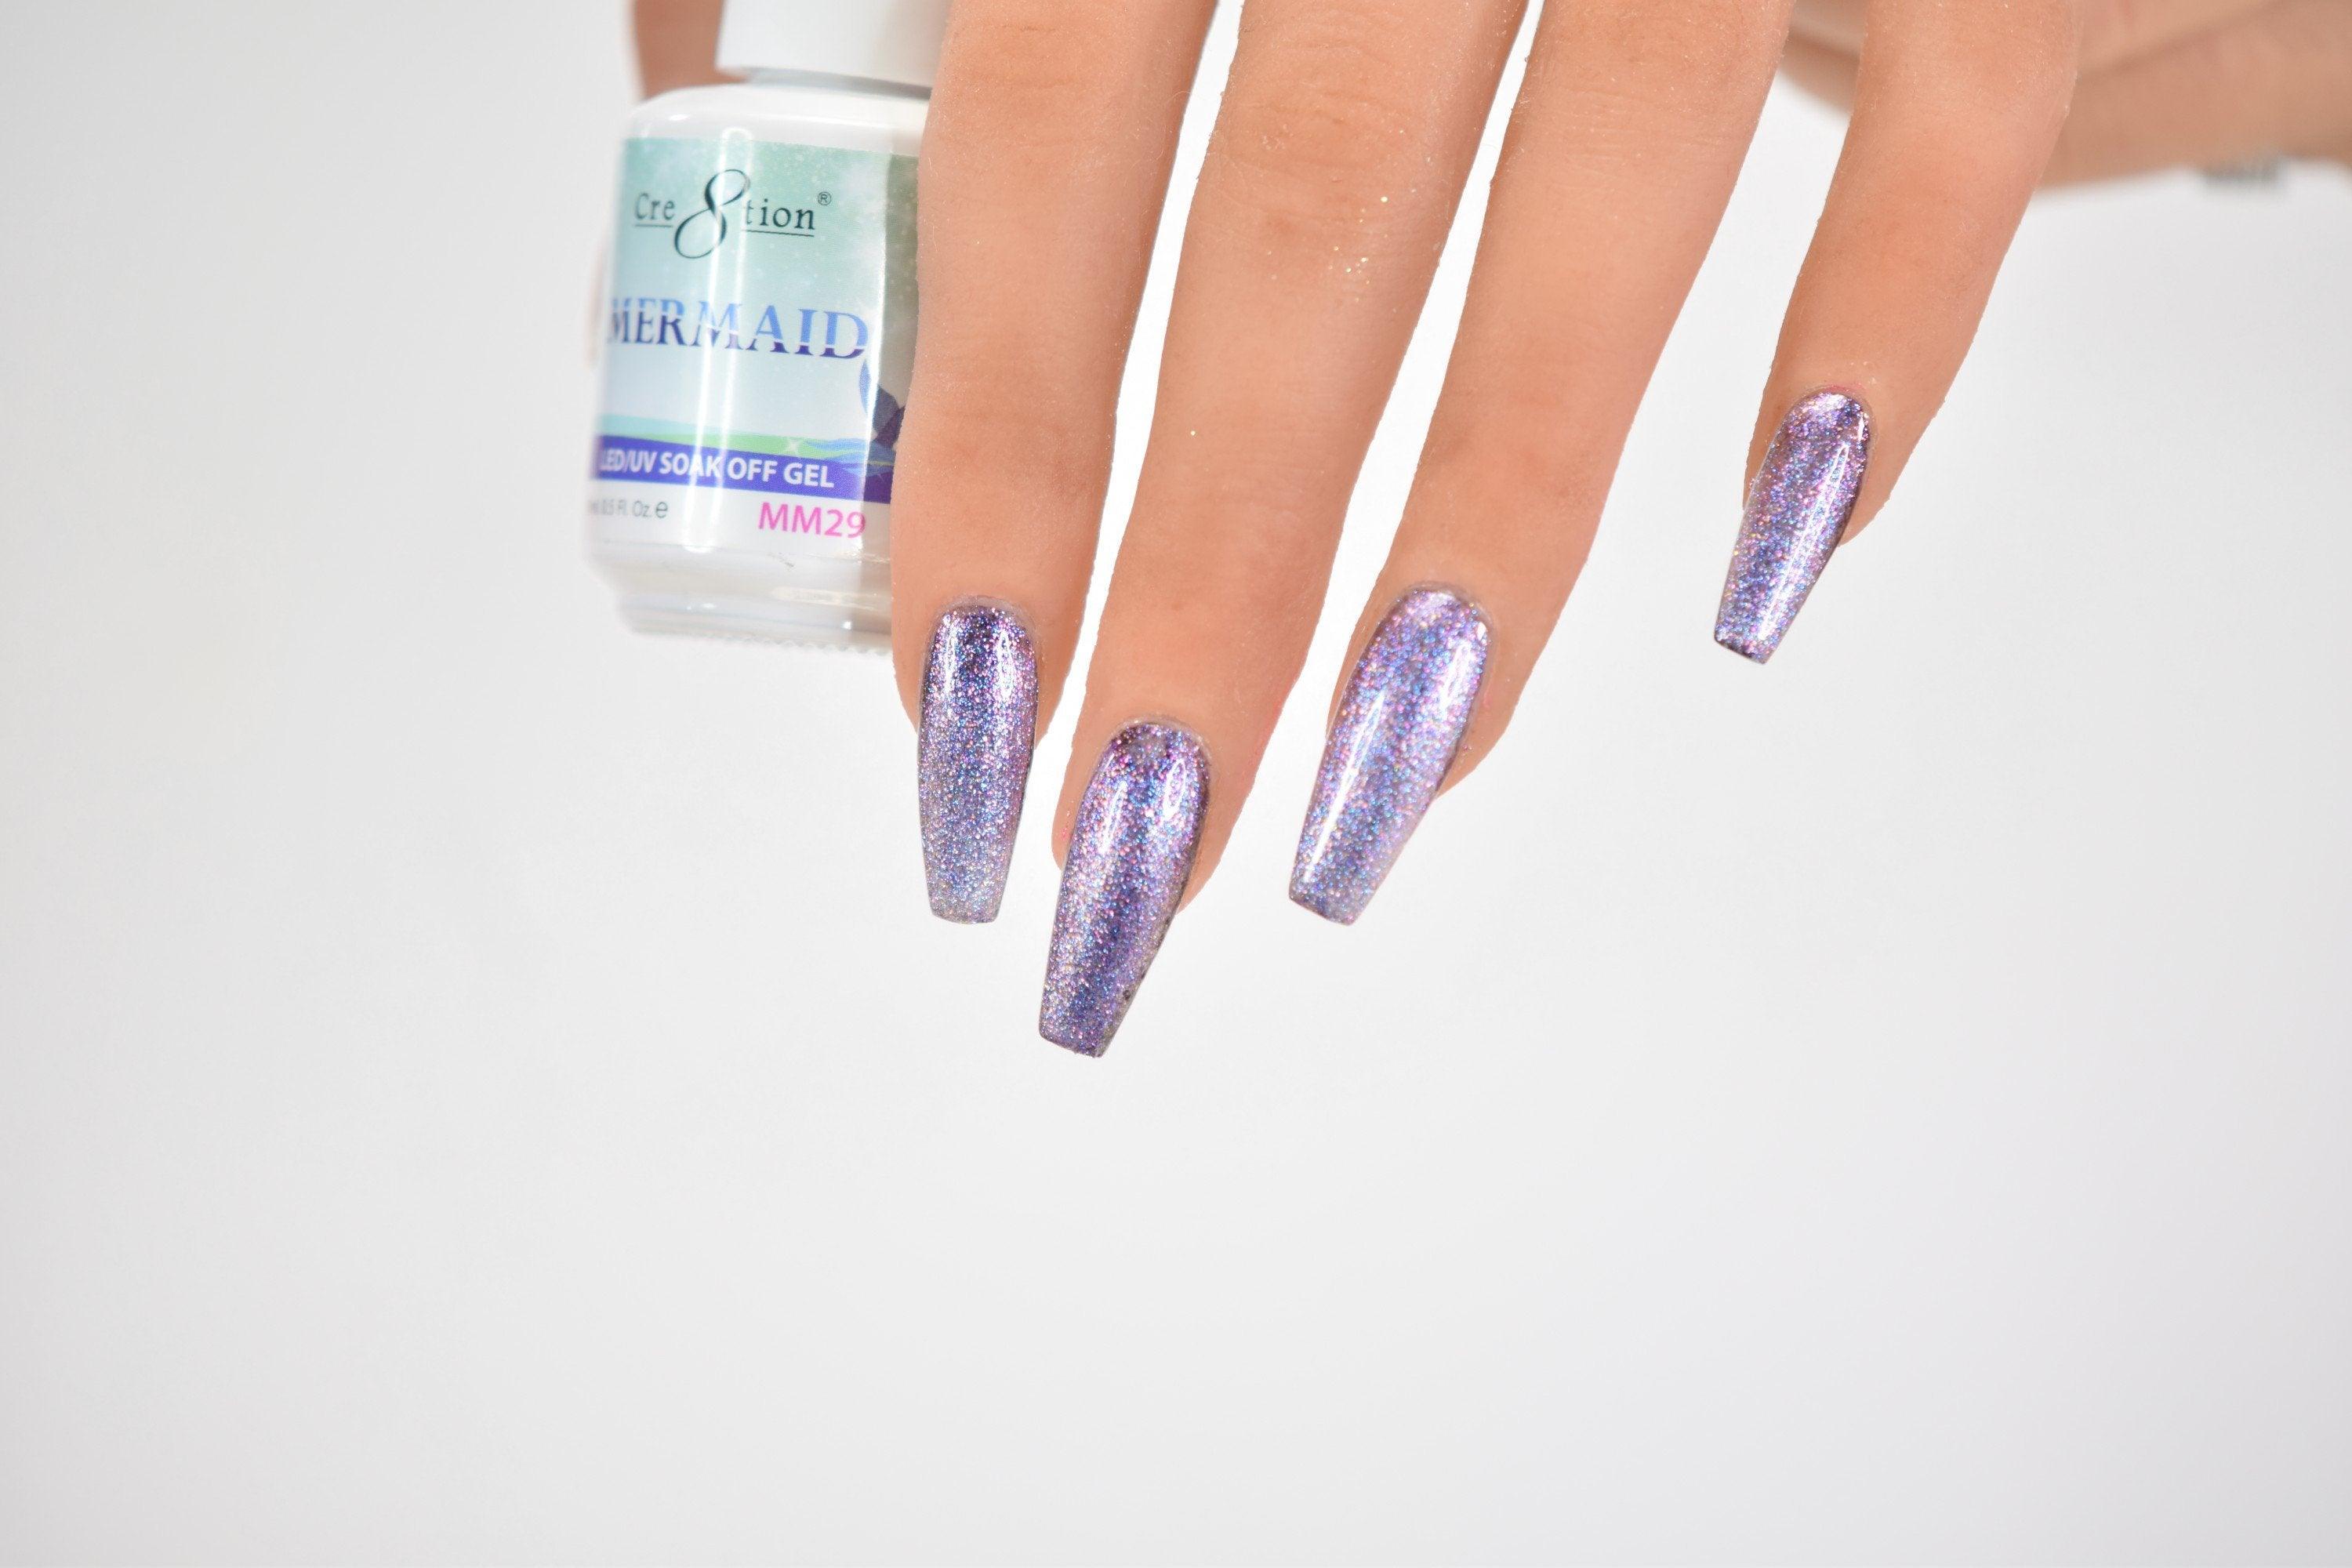 Cre8tion Soak Off Gel - Mermaid Collection #29